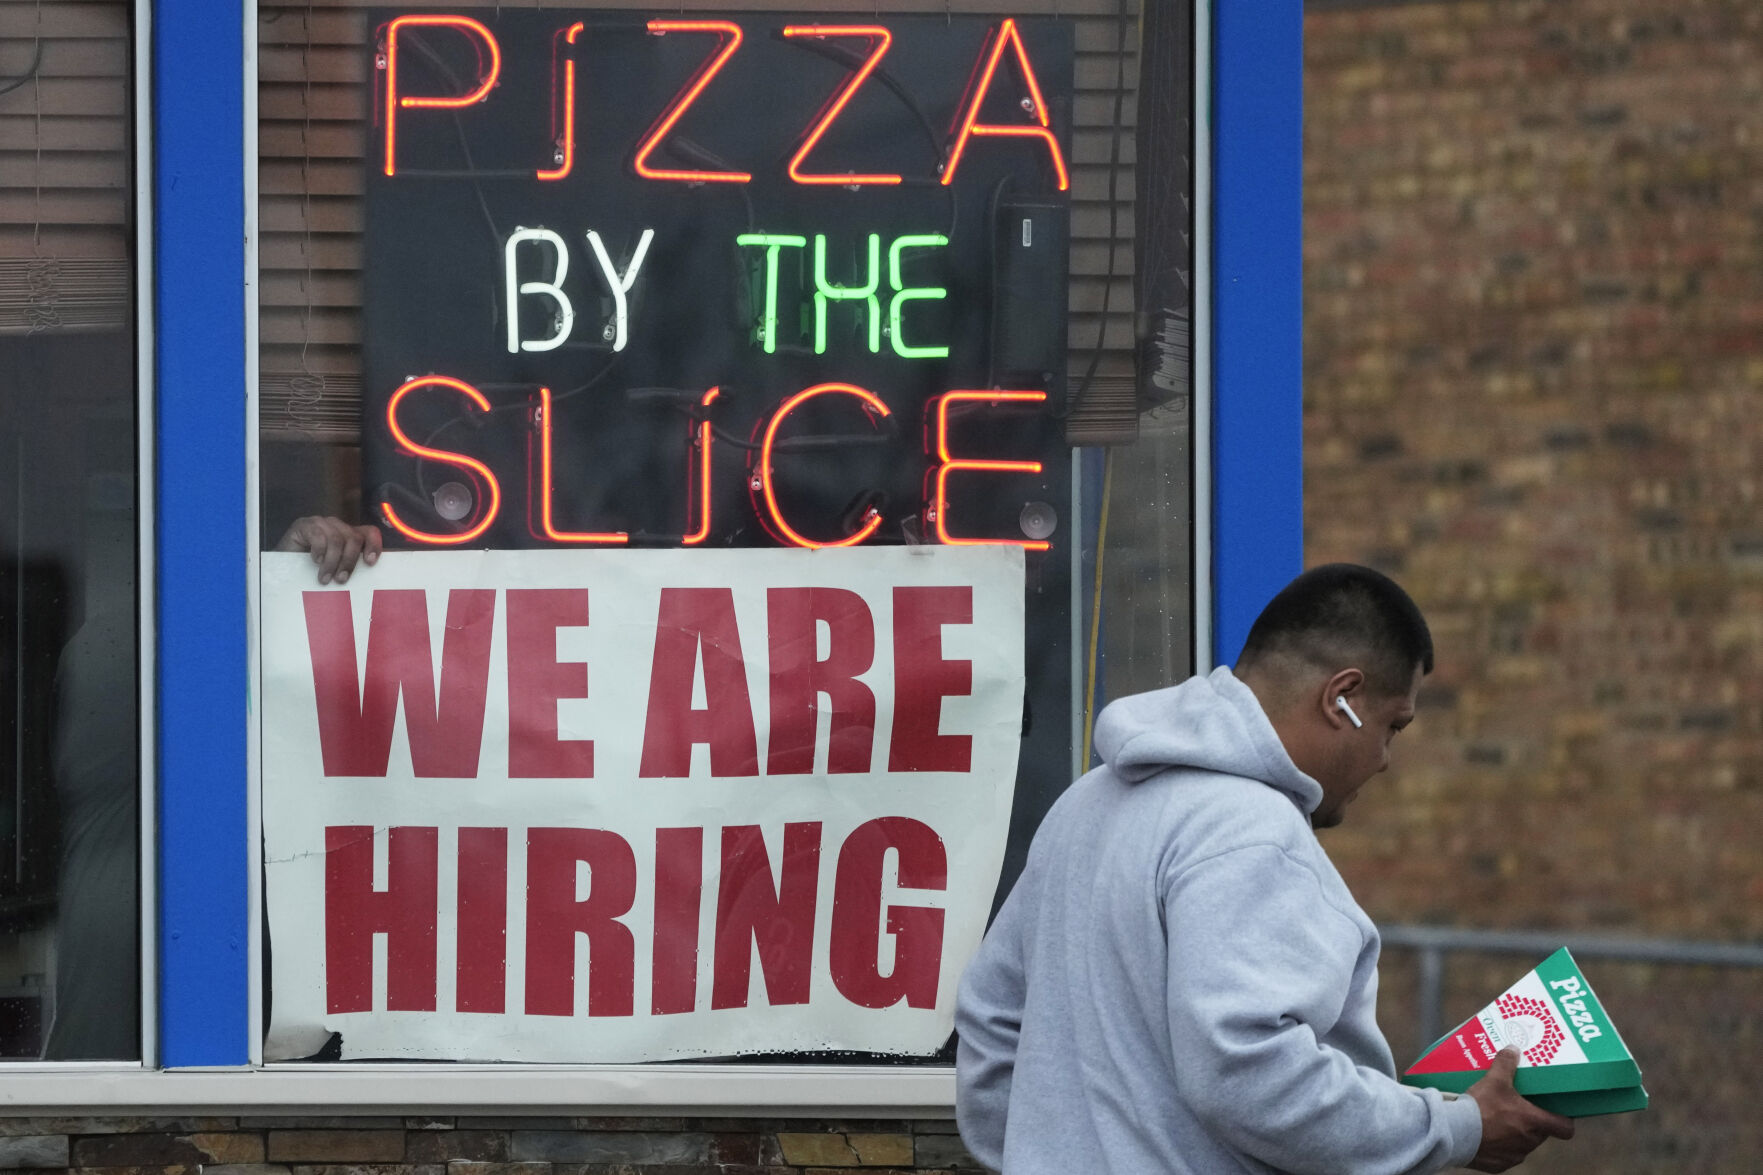 <p>FILE - A hiring sign is displayed at a restaurant in Prospect Heights, Ill., on April 4, 2023. The hot jobs market has been defying a weakening economy and confounding the Federal Reserve for months, but now shows signs of cooling. The latest set of employment data from the government shows that job openings fell in March to their lowest level since April 2021. Layoffs rose to 1.8 million, their highest level since December 2020. (AP Photo/Nam Y. Huh, File)</p>   PHOTO CREDIT: Nam Y. Huh